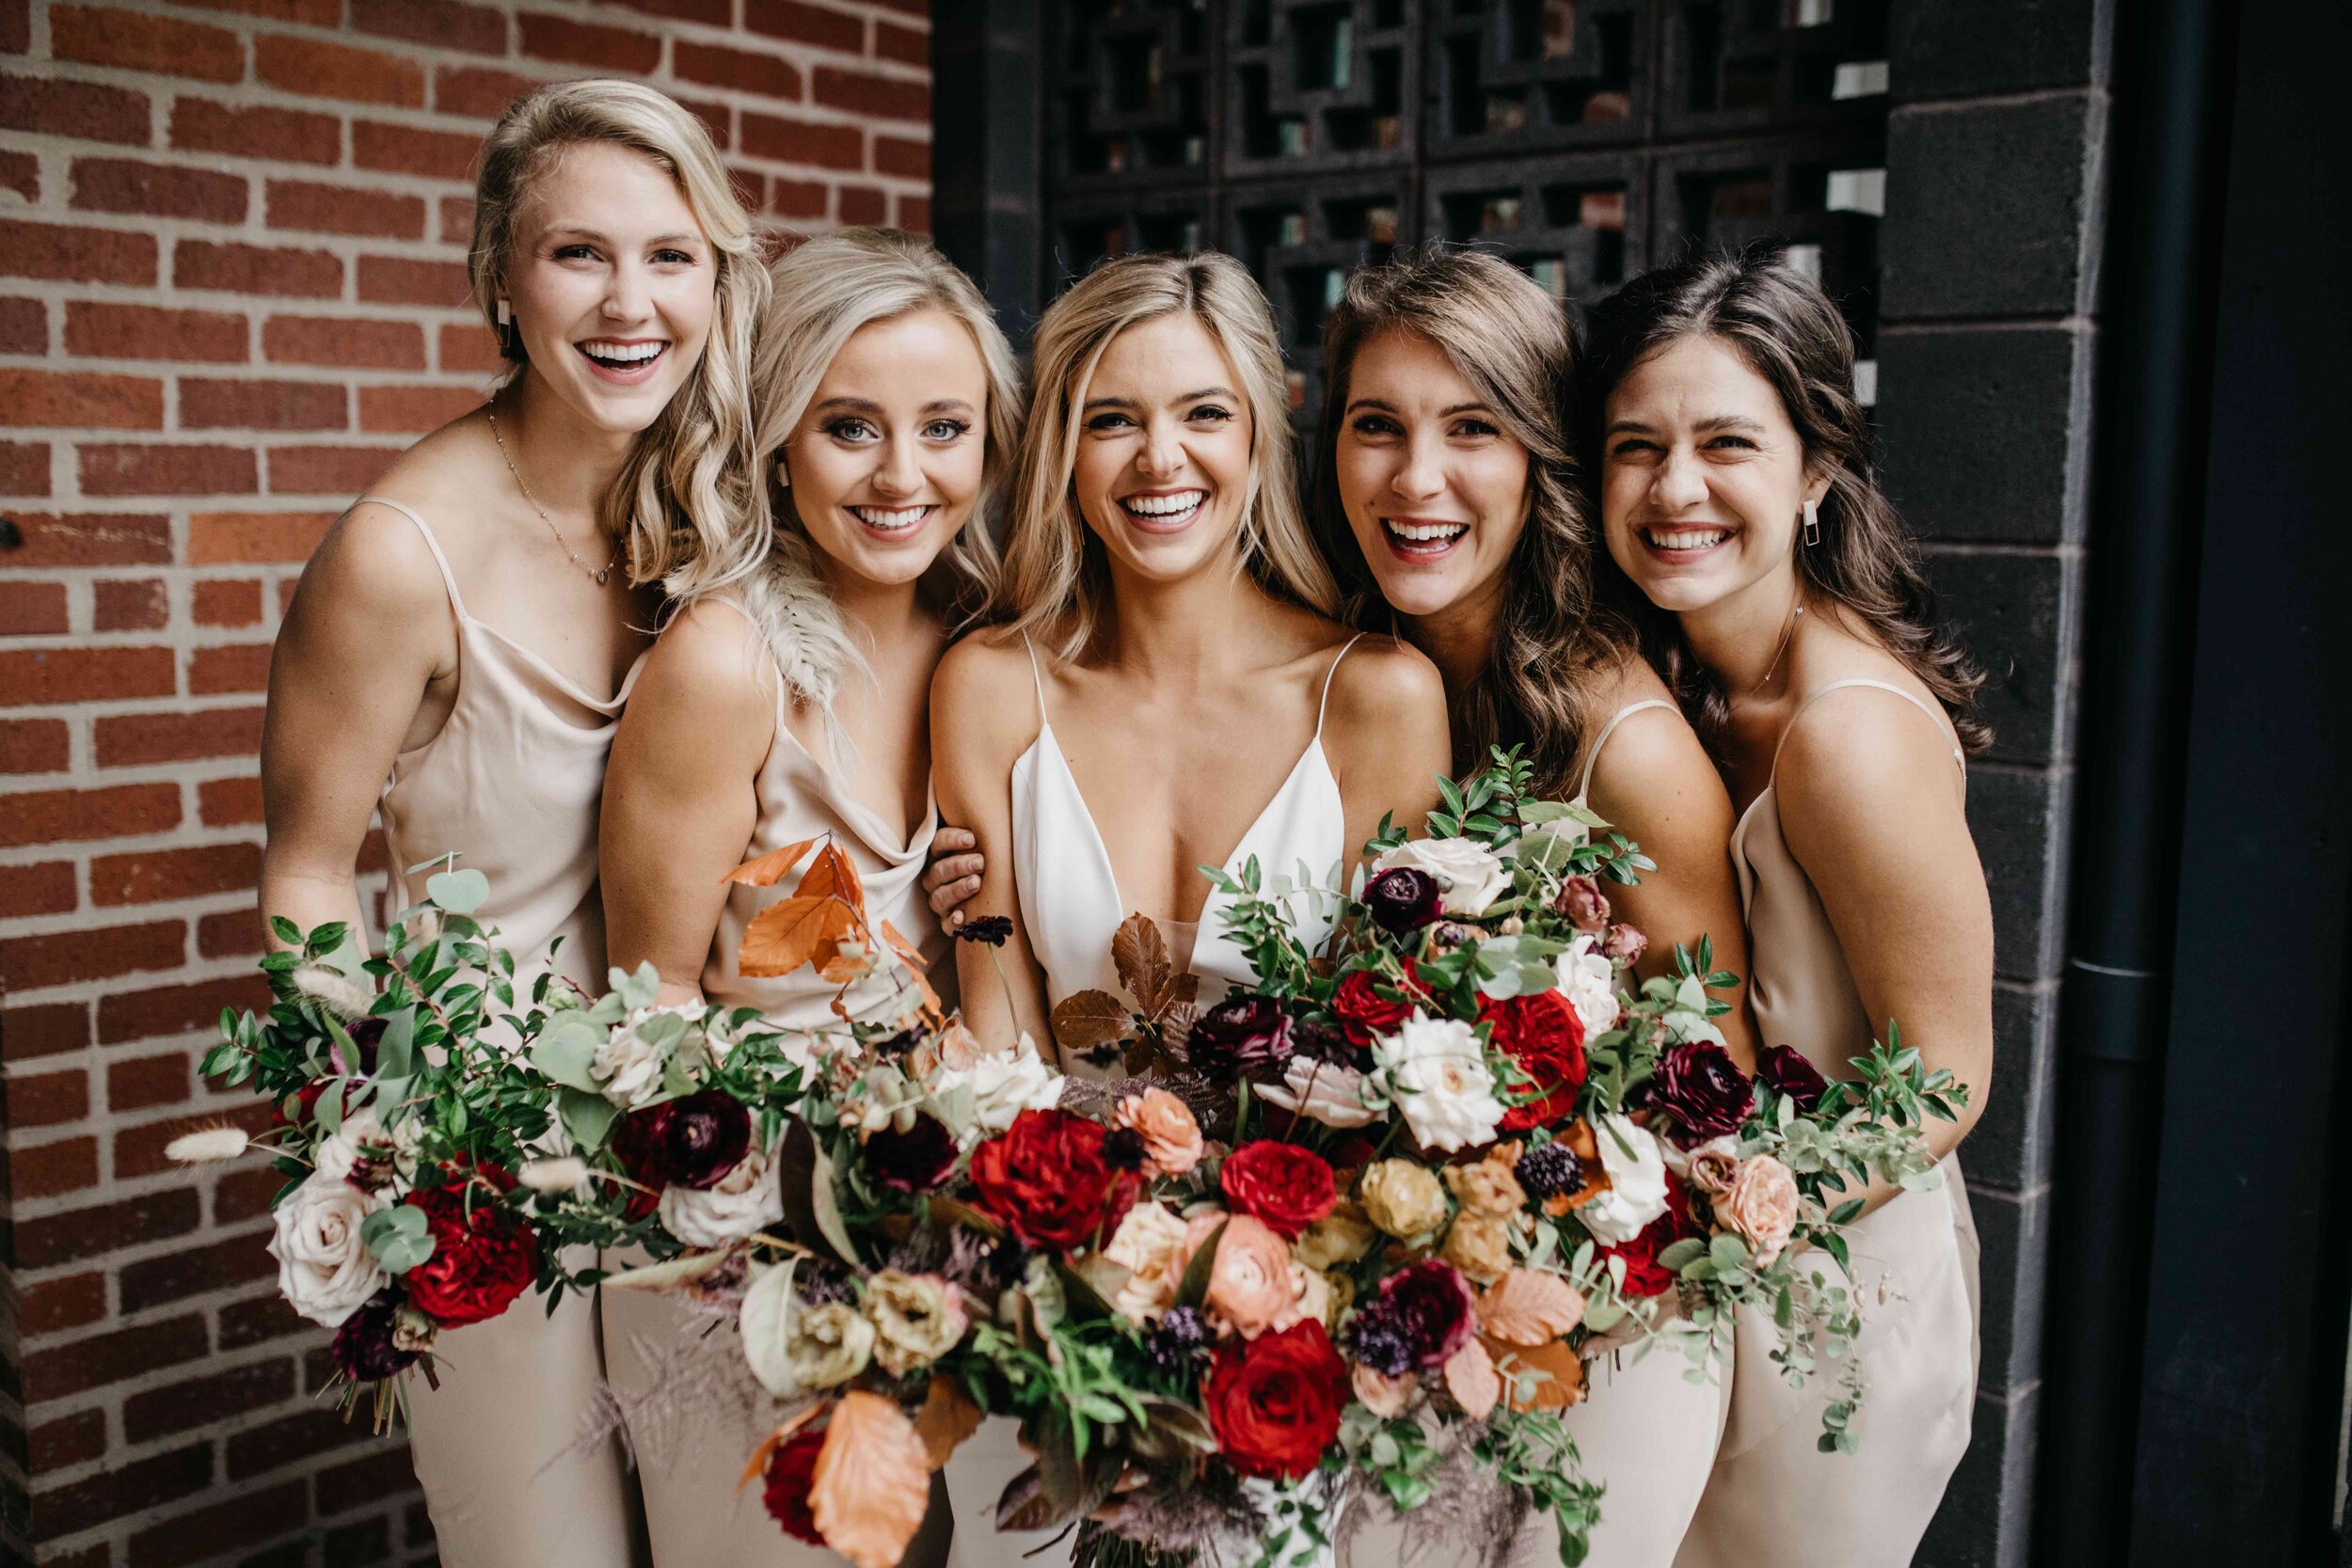 Champagne bridesmaid dresses with vibrant, deep color palette for the bouquets with burgundy garden roses, dusty rose and eggplant ranunculus, copper fall foliage, and airy greenery. Nashville wedding florist, Rosemary & Finch Floral Design.